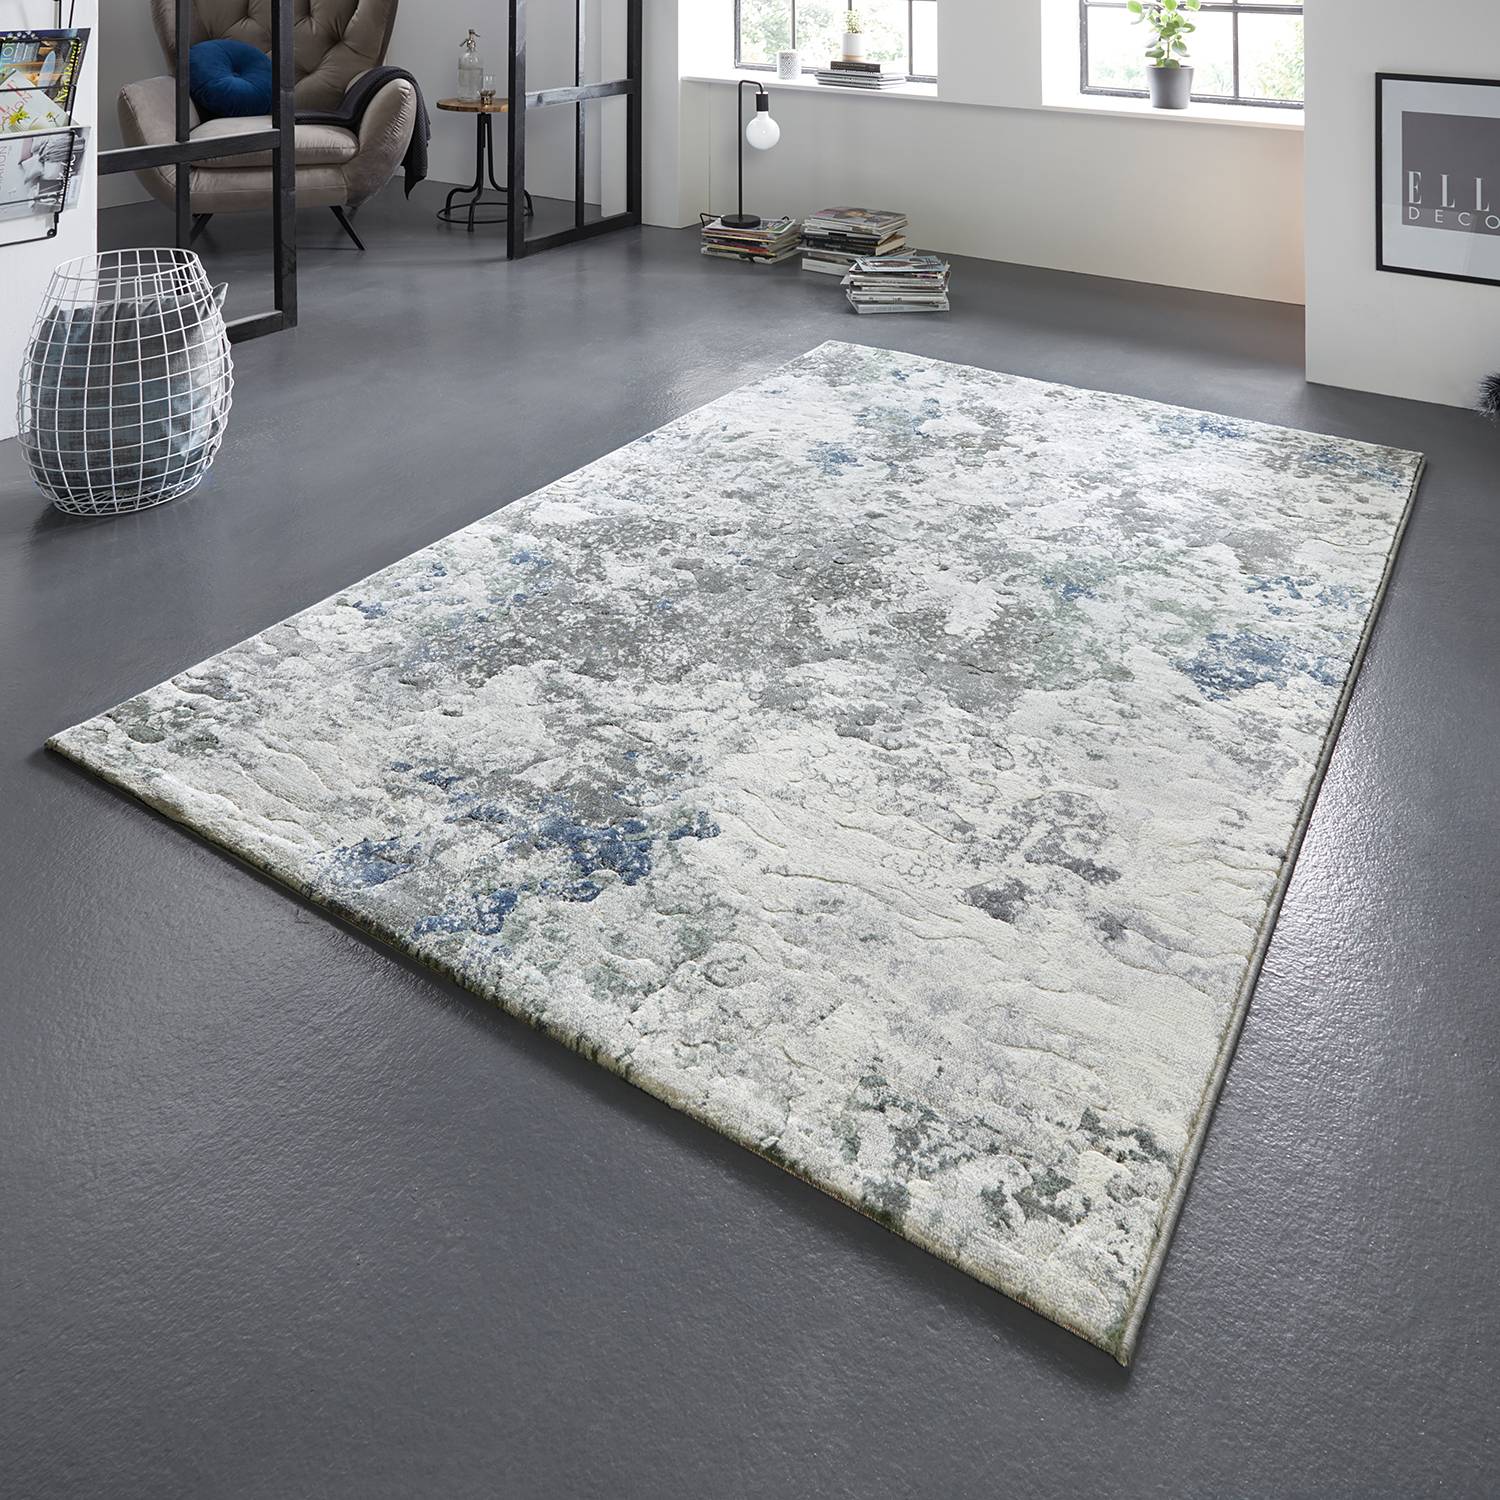 Image of Tapis Fontaine 000000001000168250